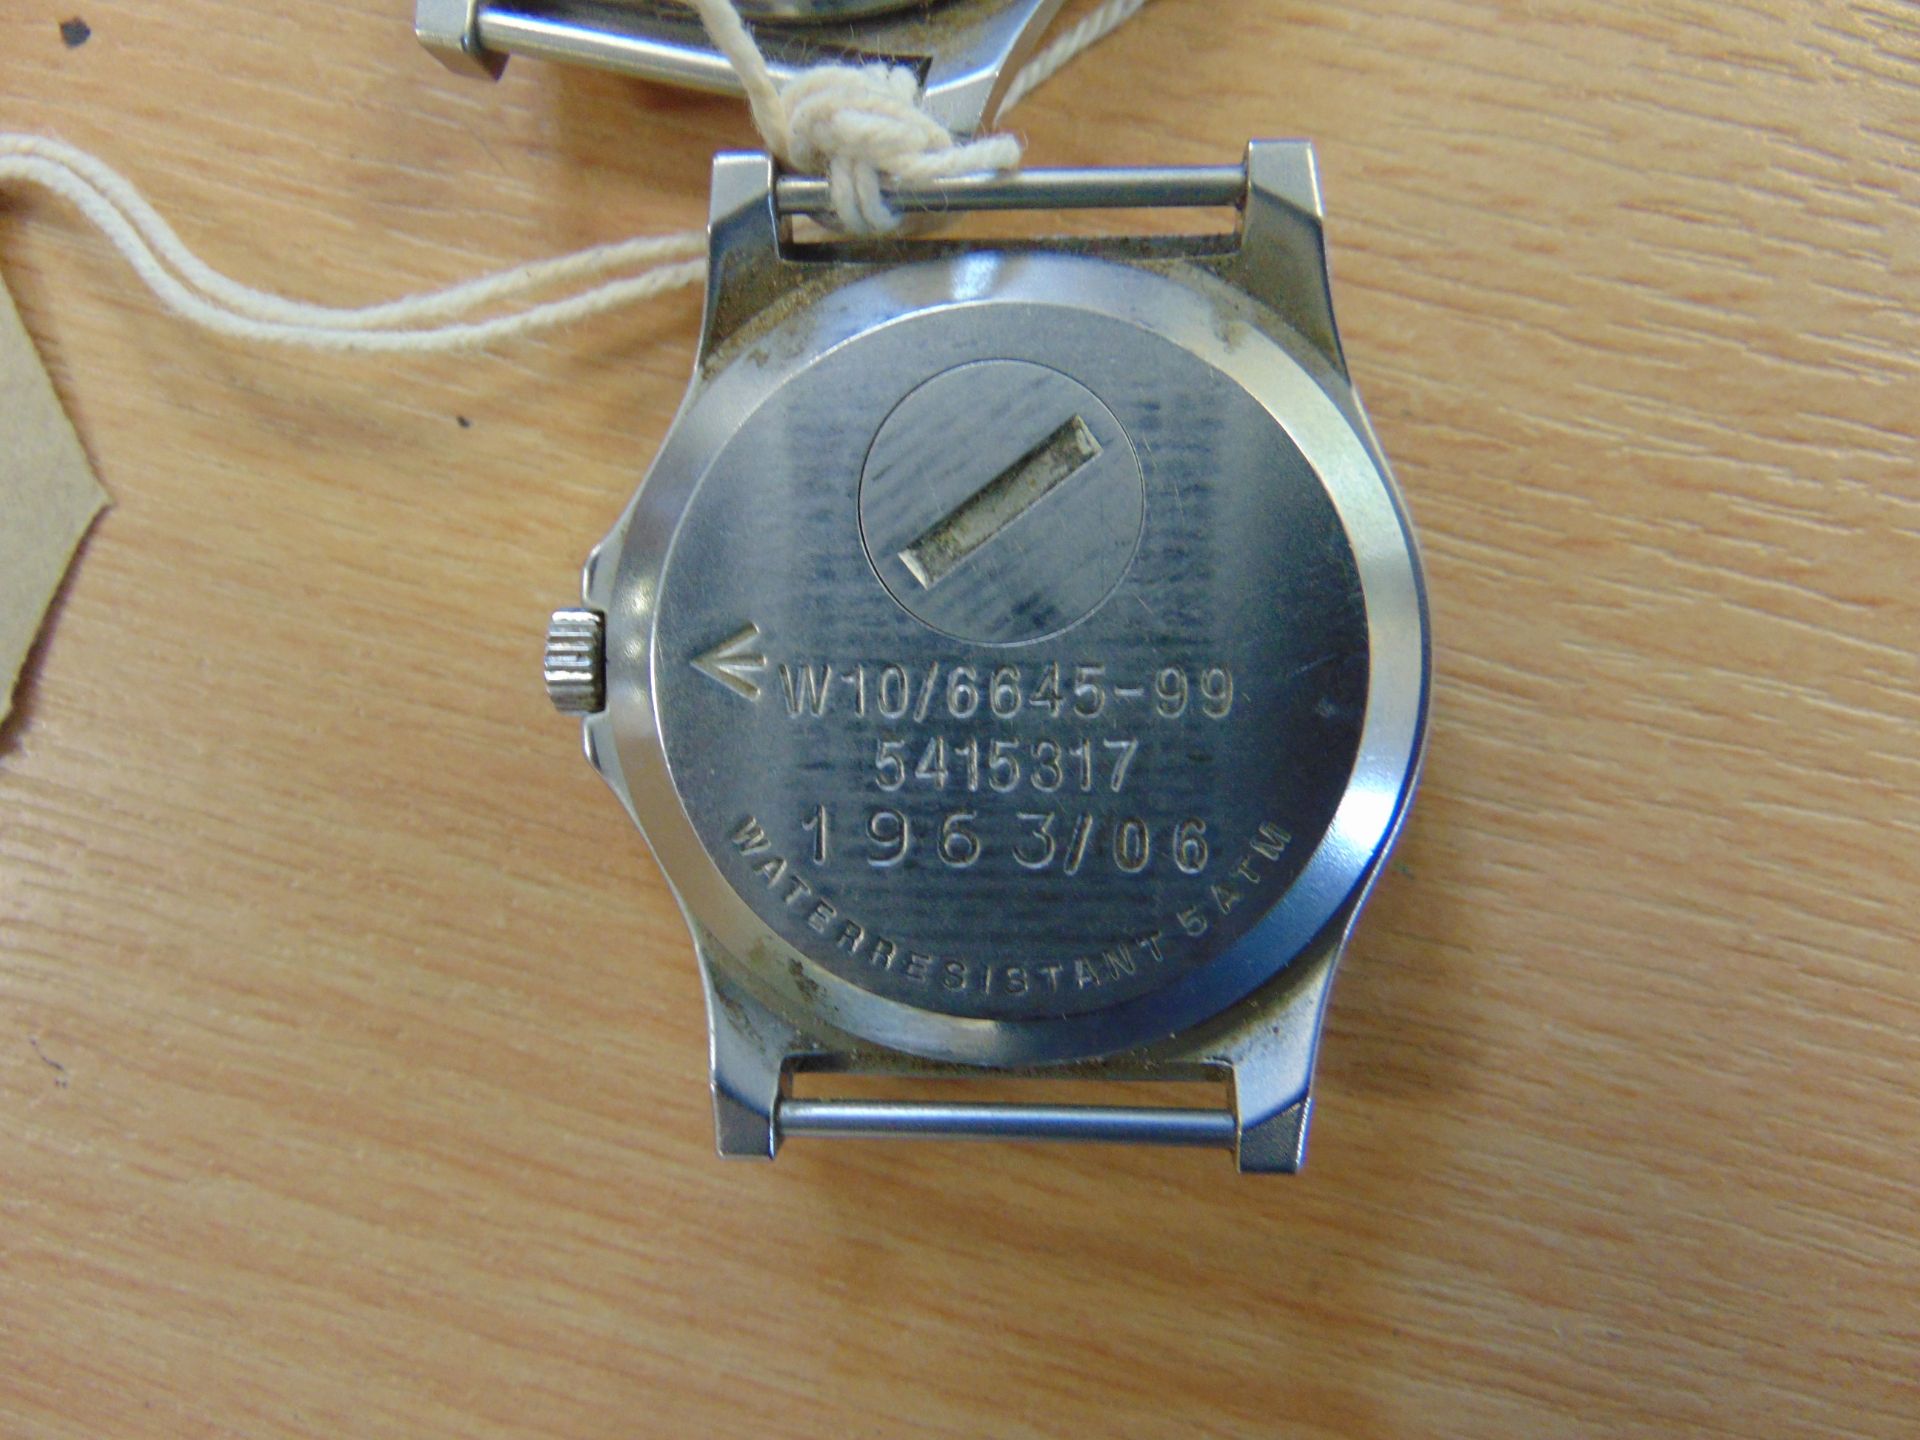 2x CWC W10 WATCHES DATED 2005 & 2006 WATER RESISTANT TO 5 ATM - Image 5 of 6